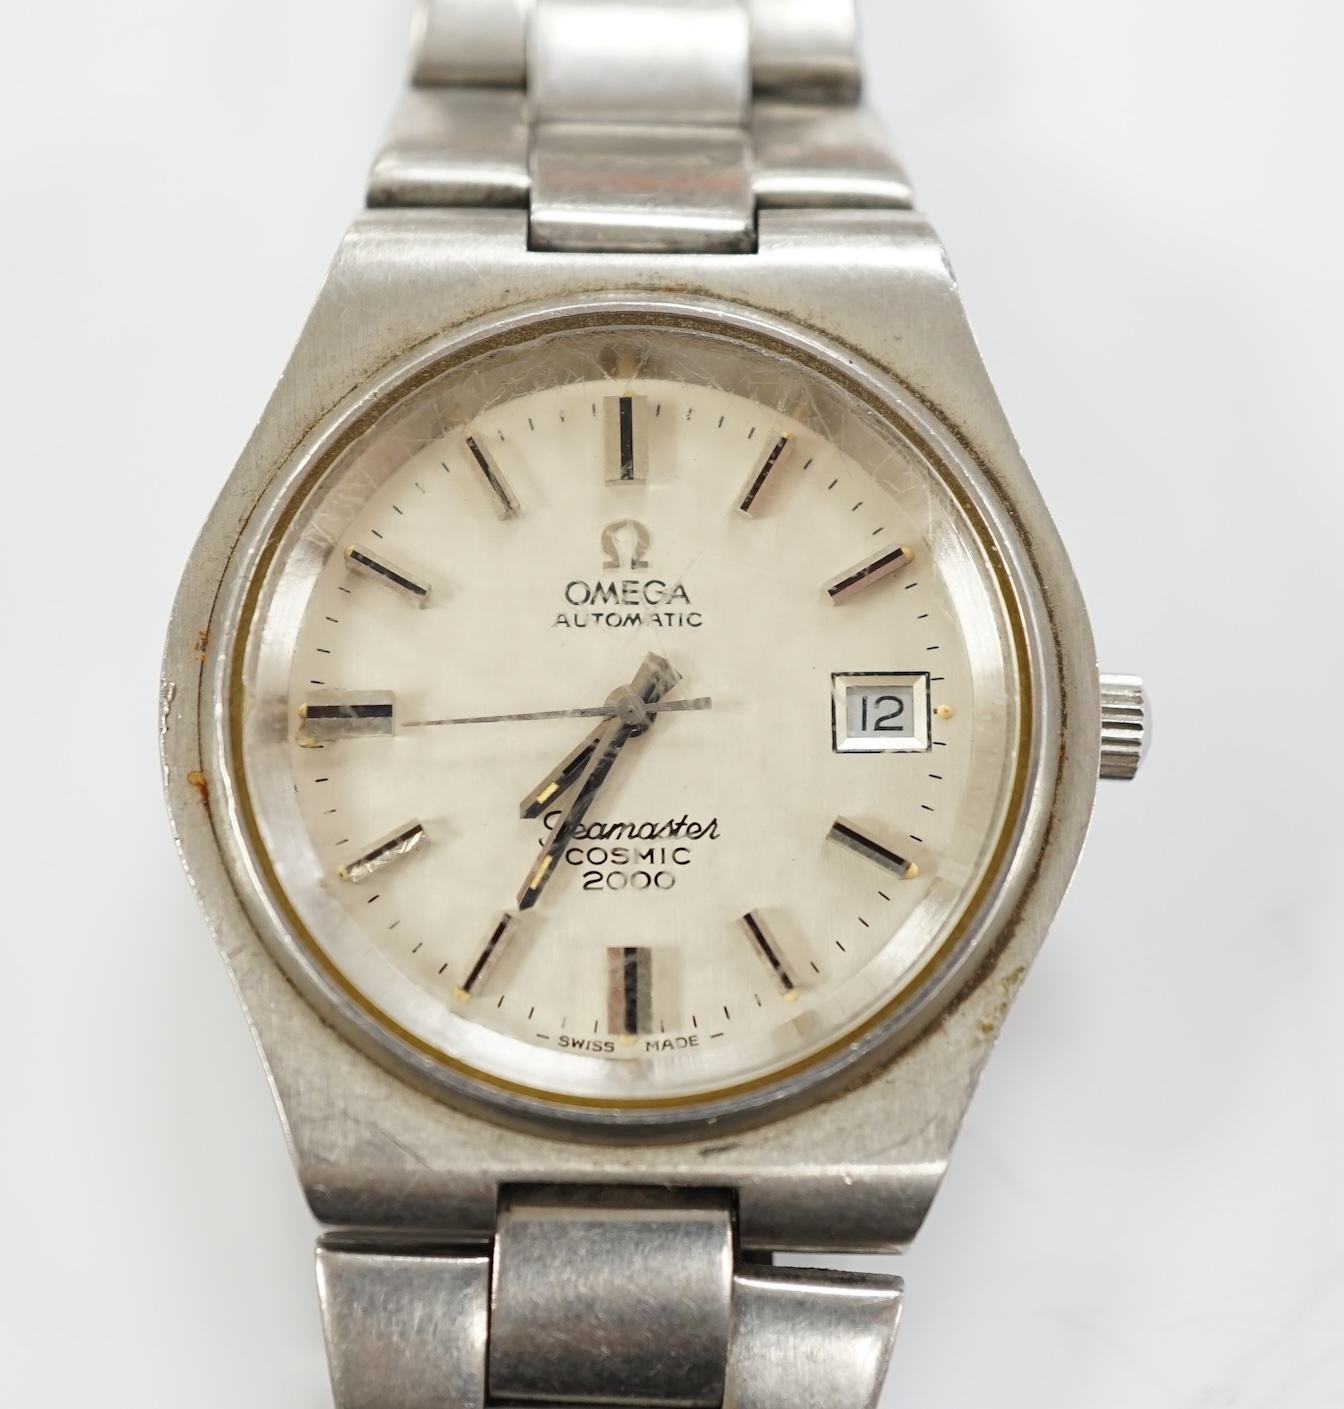 A gentleman's stainless steel Omega Seamaster Cosmic Automatic wrist watch, with baton numerals, on a stainless steel Omega bracelet, no box or papers.